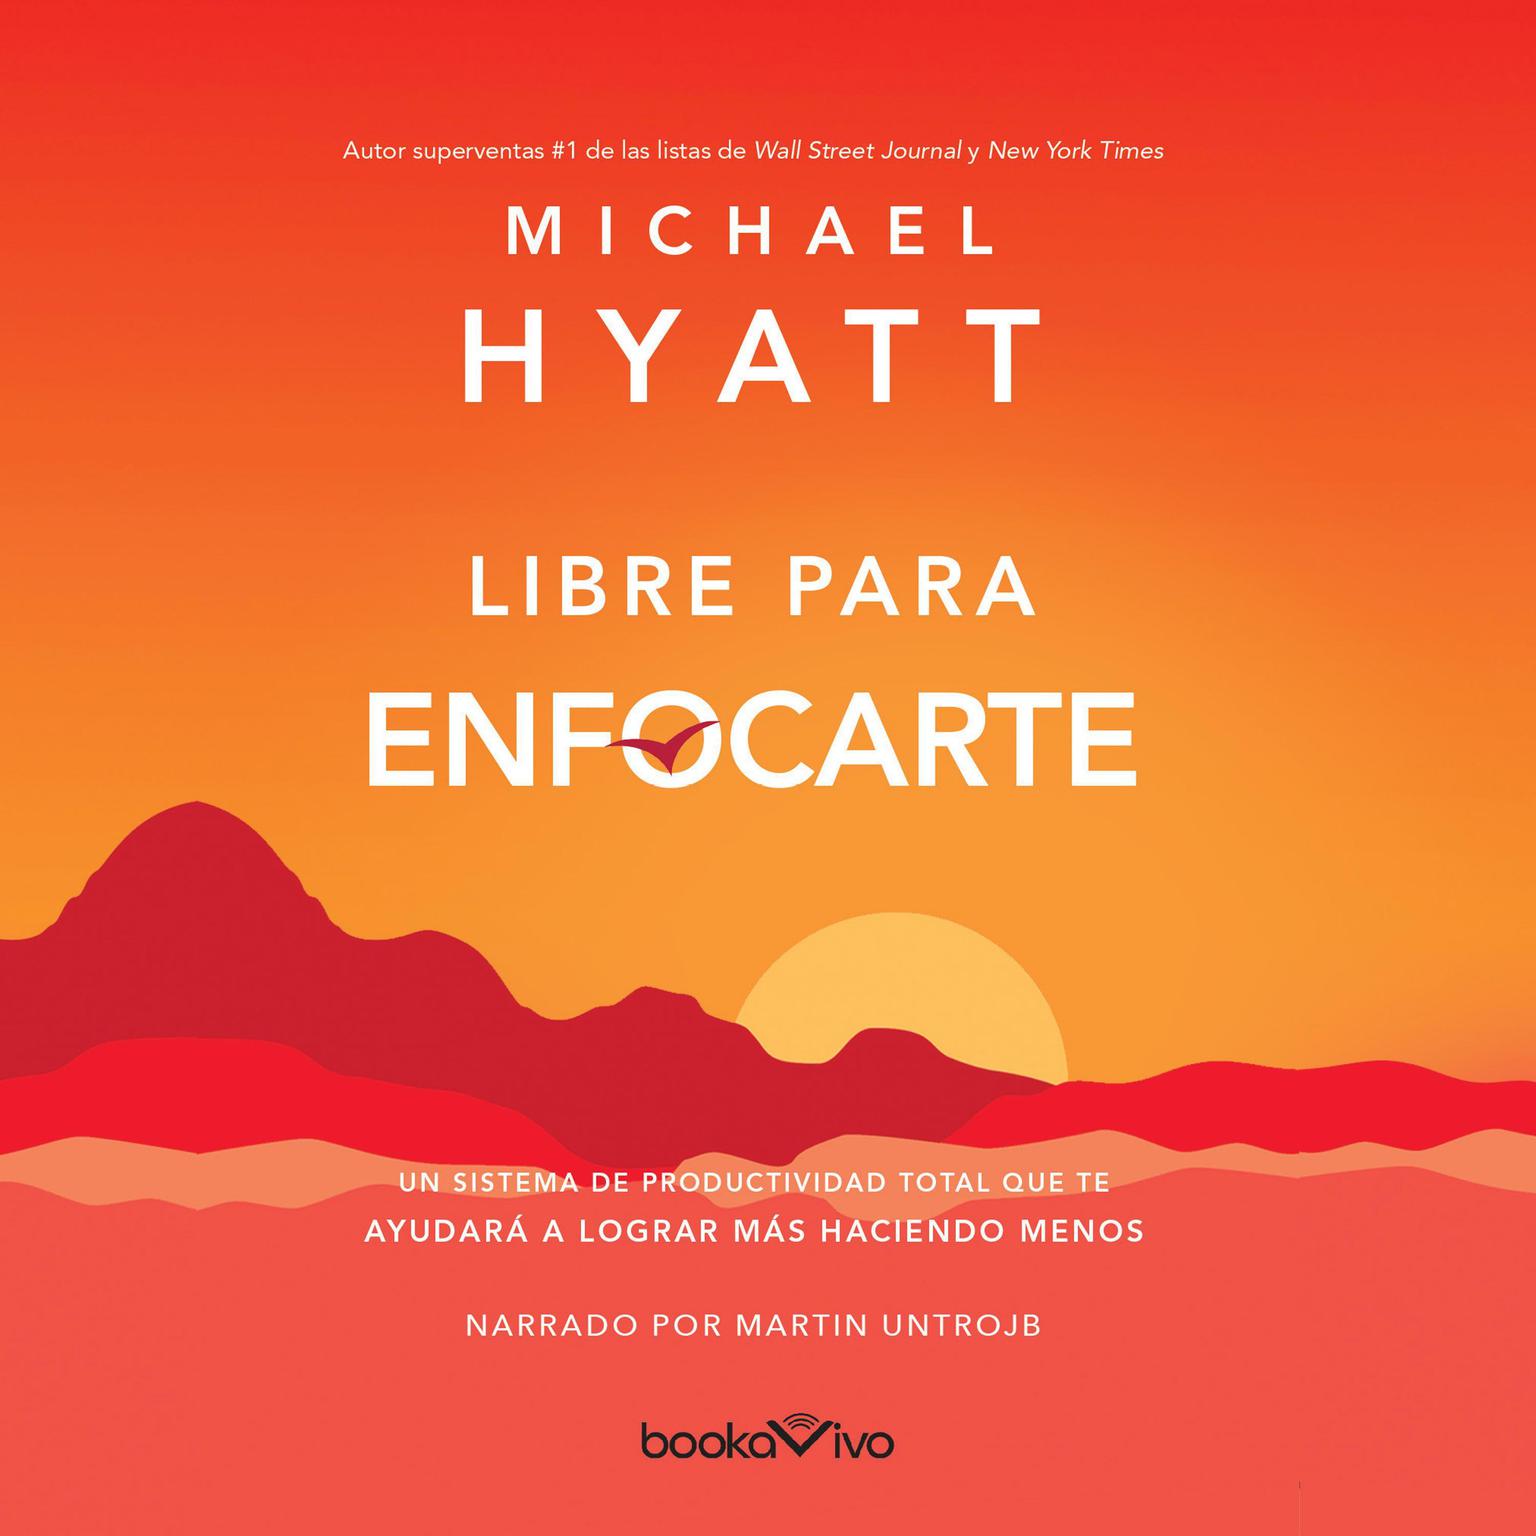 Libre para enfocarte: A Total Productivity System to Achieve More by Doing Less Audiobook, by Michael Hyatt